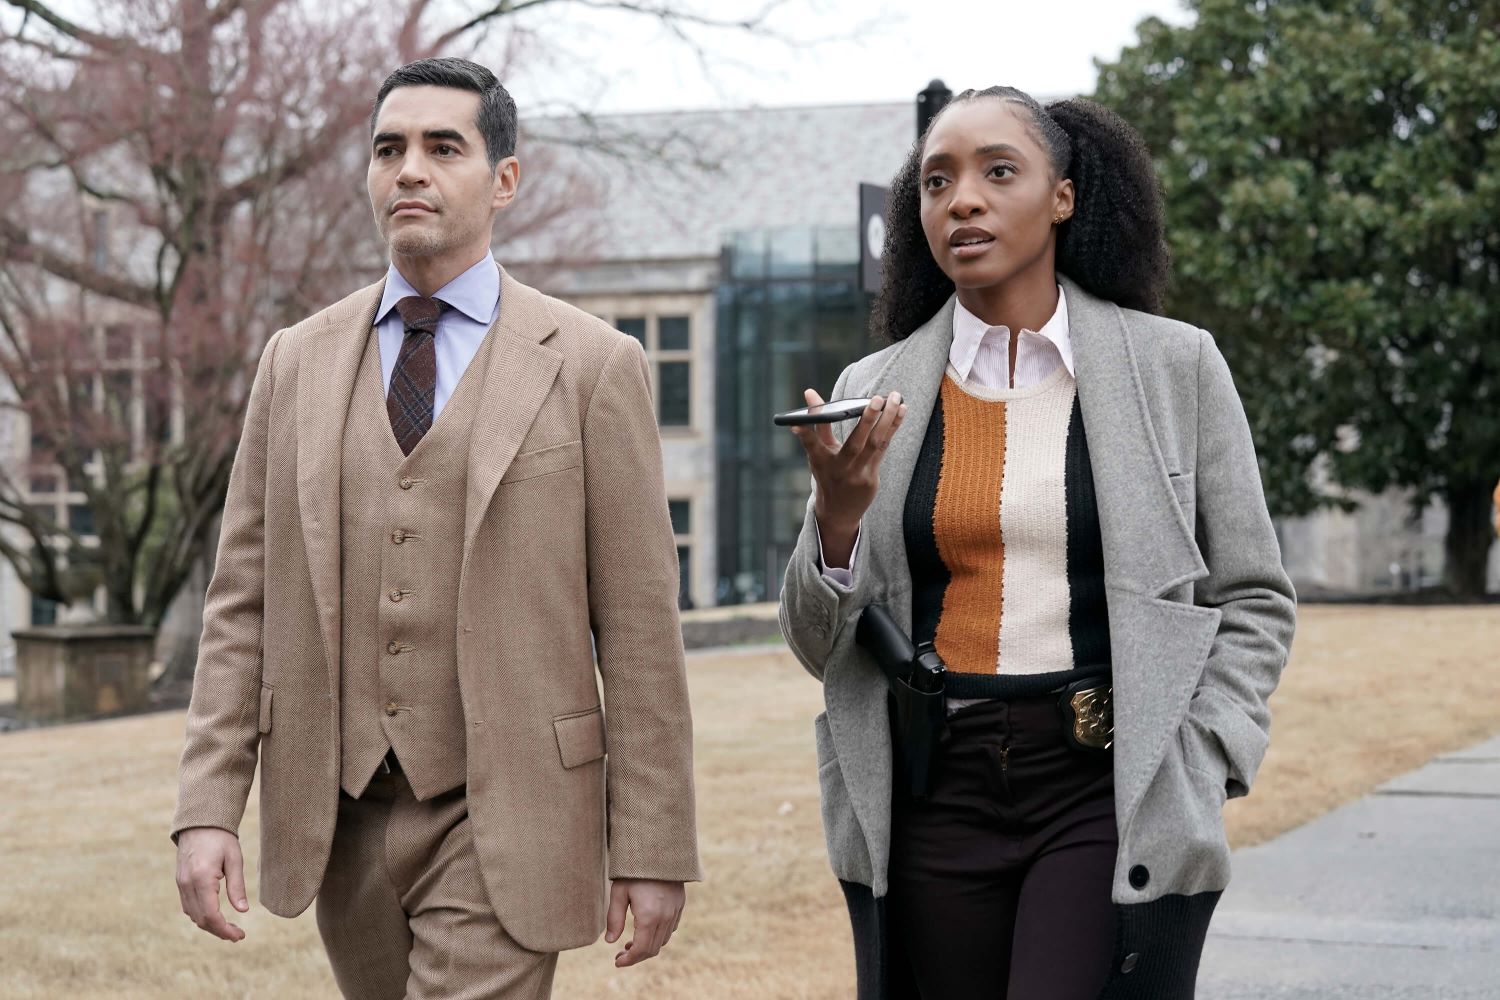 Ramón Rodríguez and Iantha Richardson star as Will Trent and Faith Mitchell in all episodes of 'Will Trent' on ABC. Will wears a tan three-piece suit